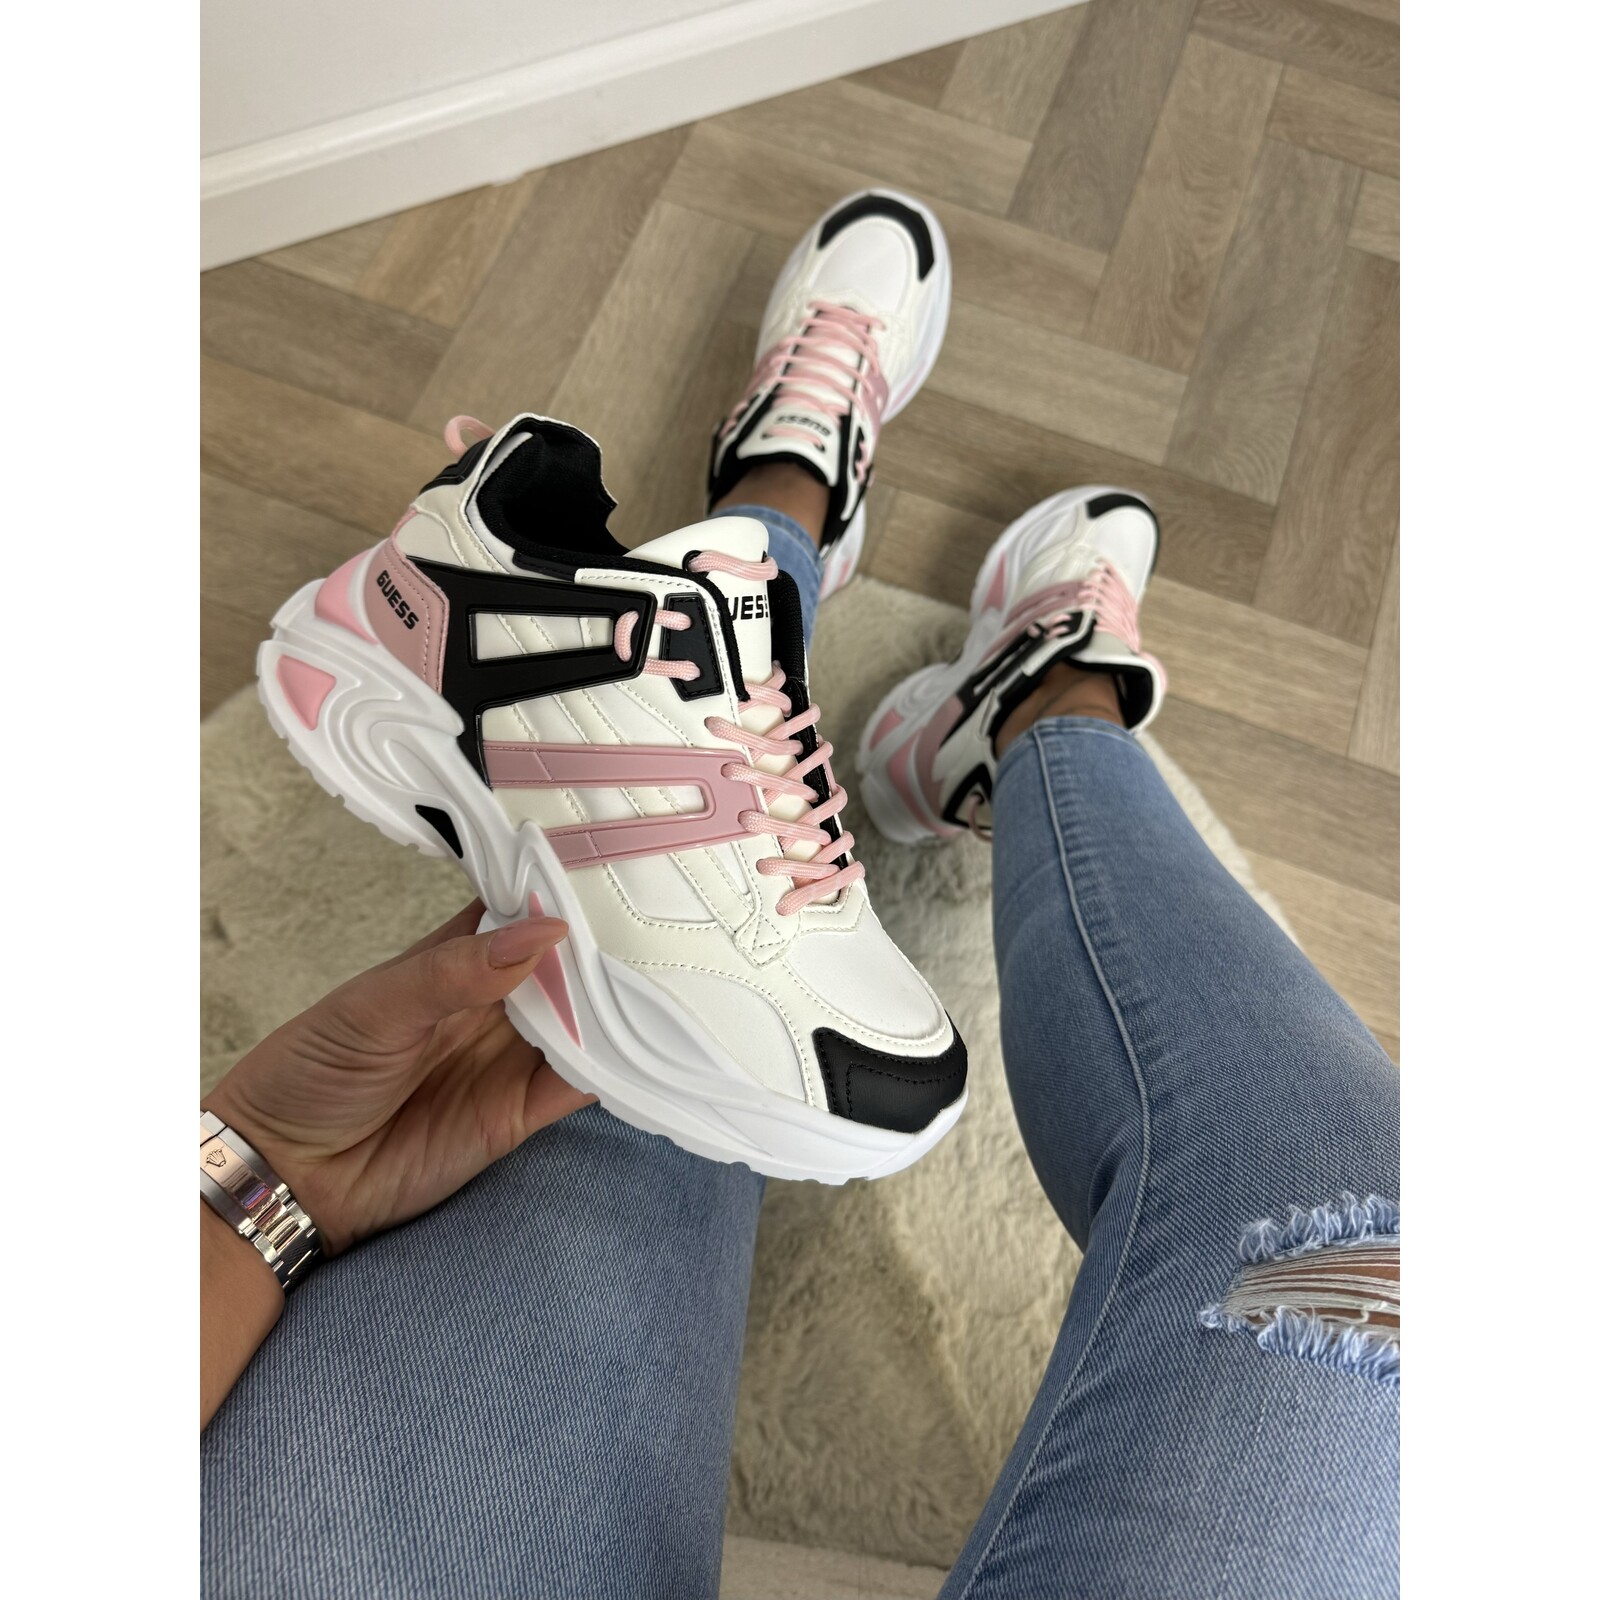 Guess Sneakers Lily Pink Black Guess 774